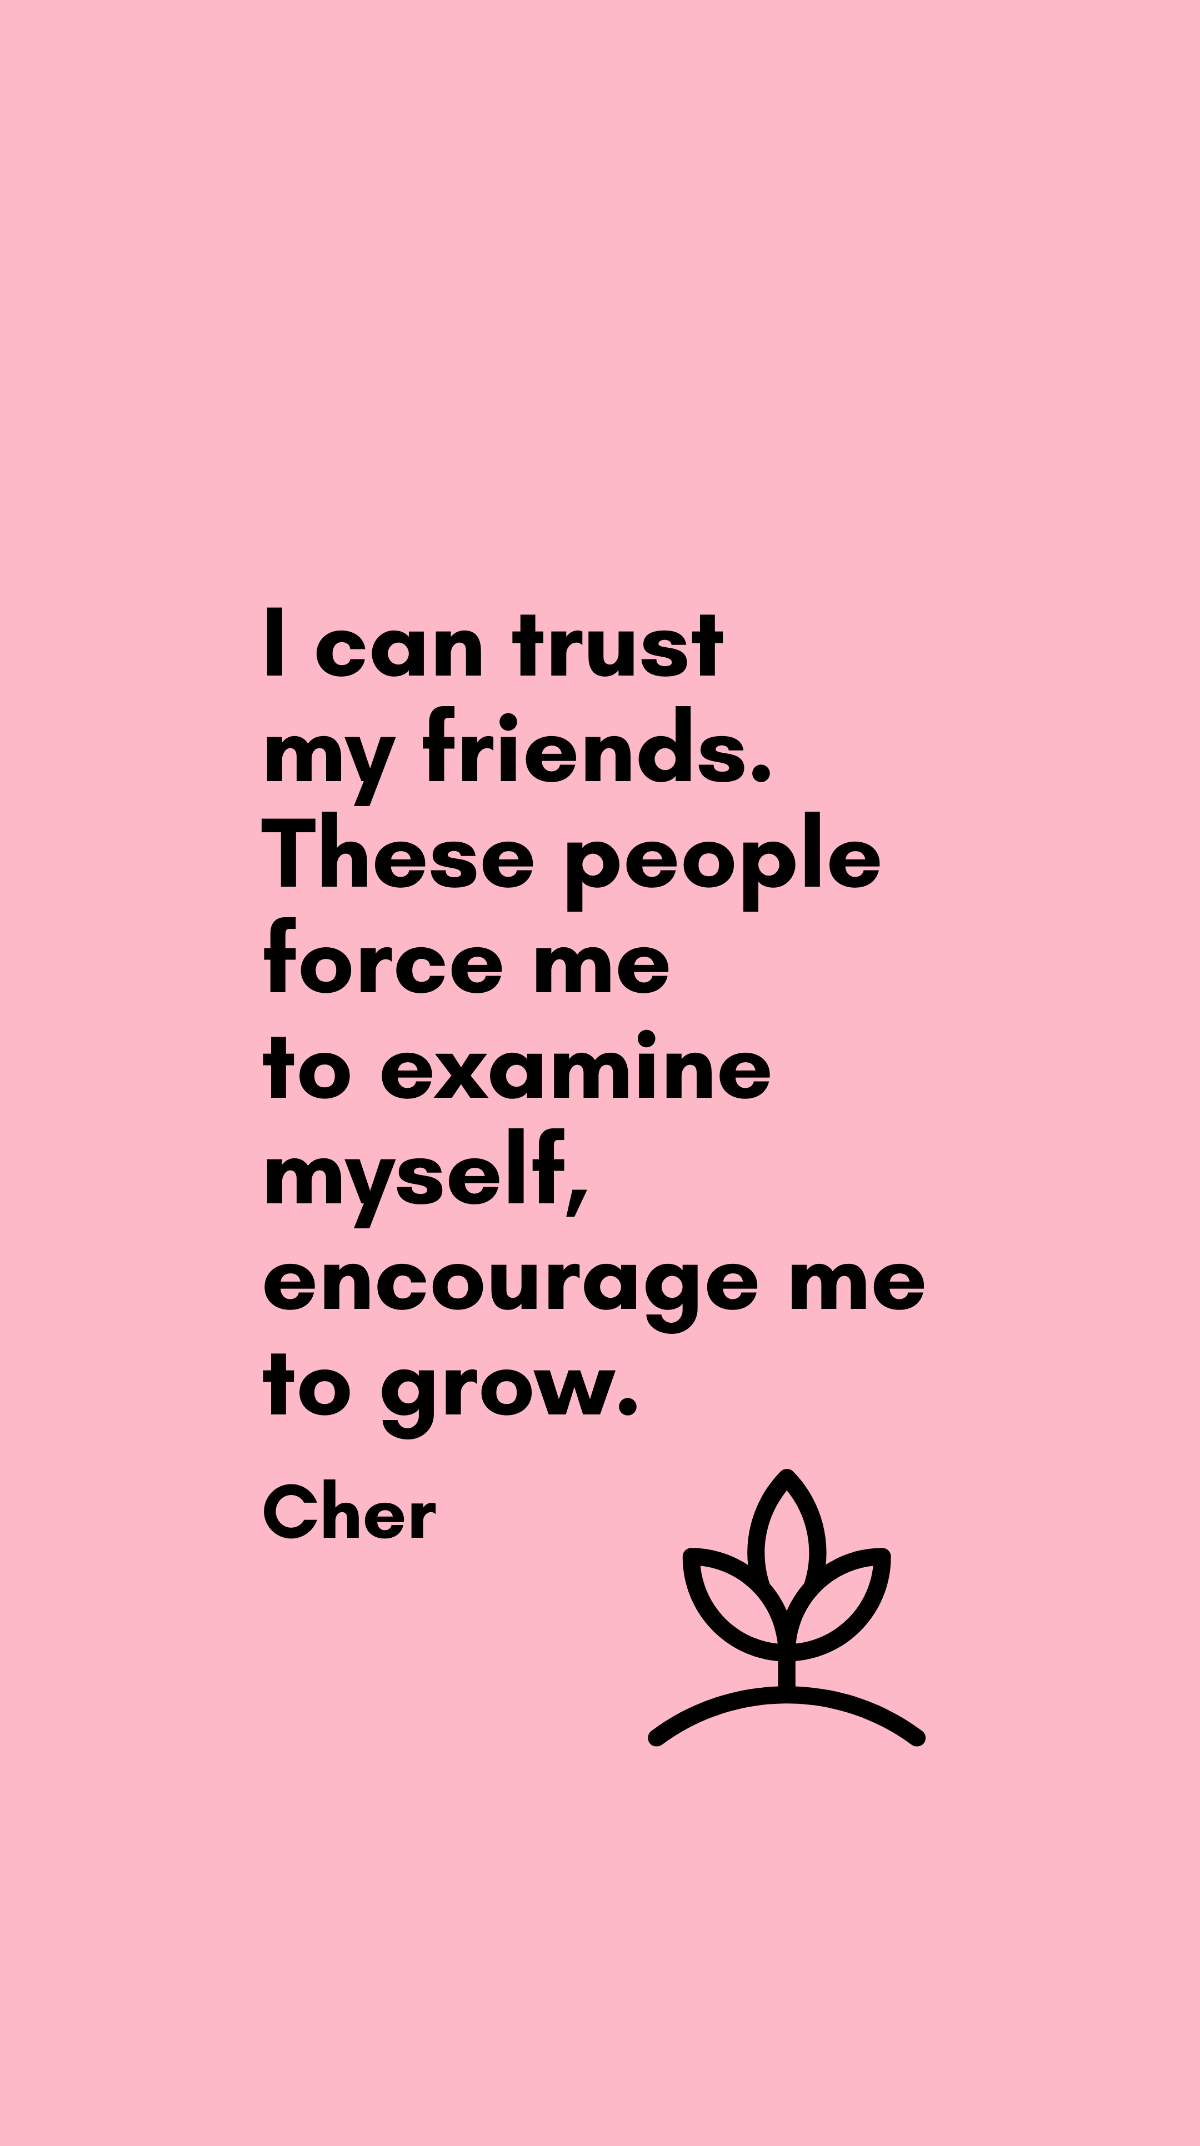 Free Cher - I can trust my friends. These people force me to examine myself, encourage me to grow. Template